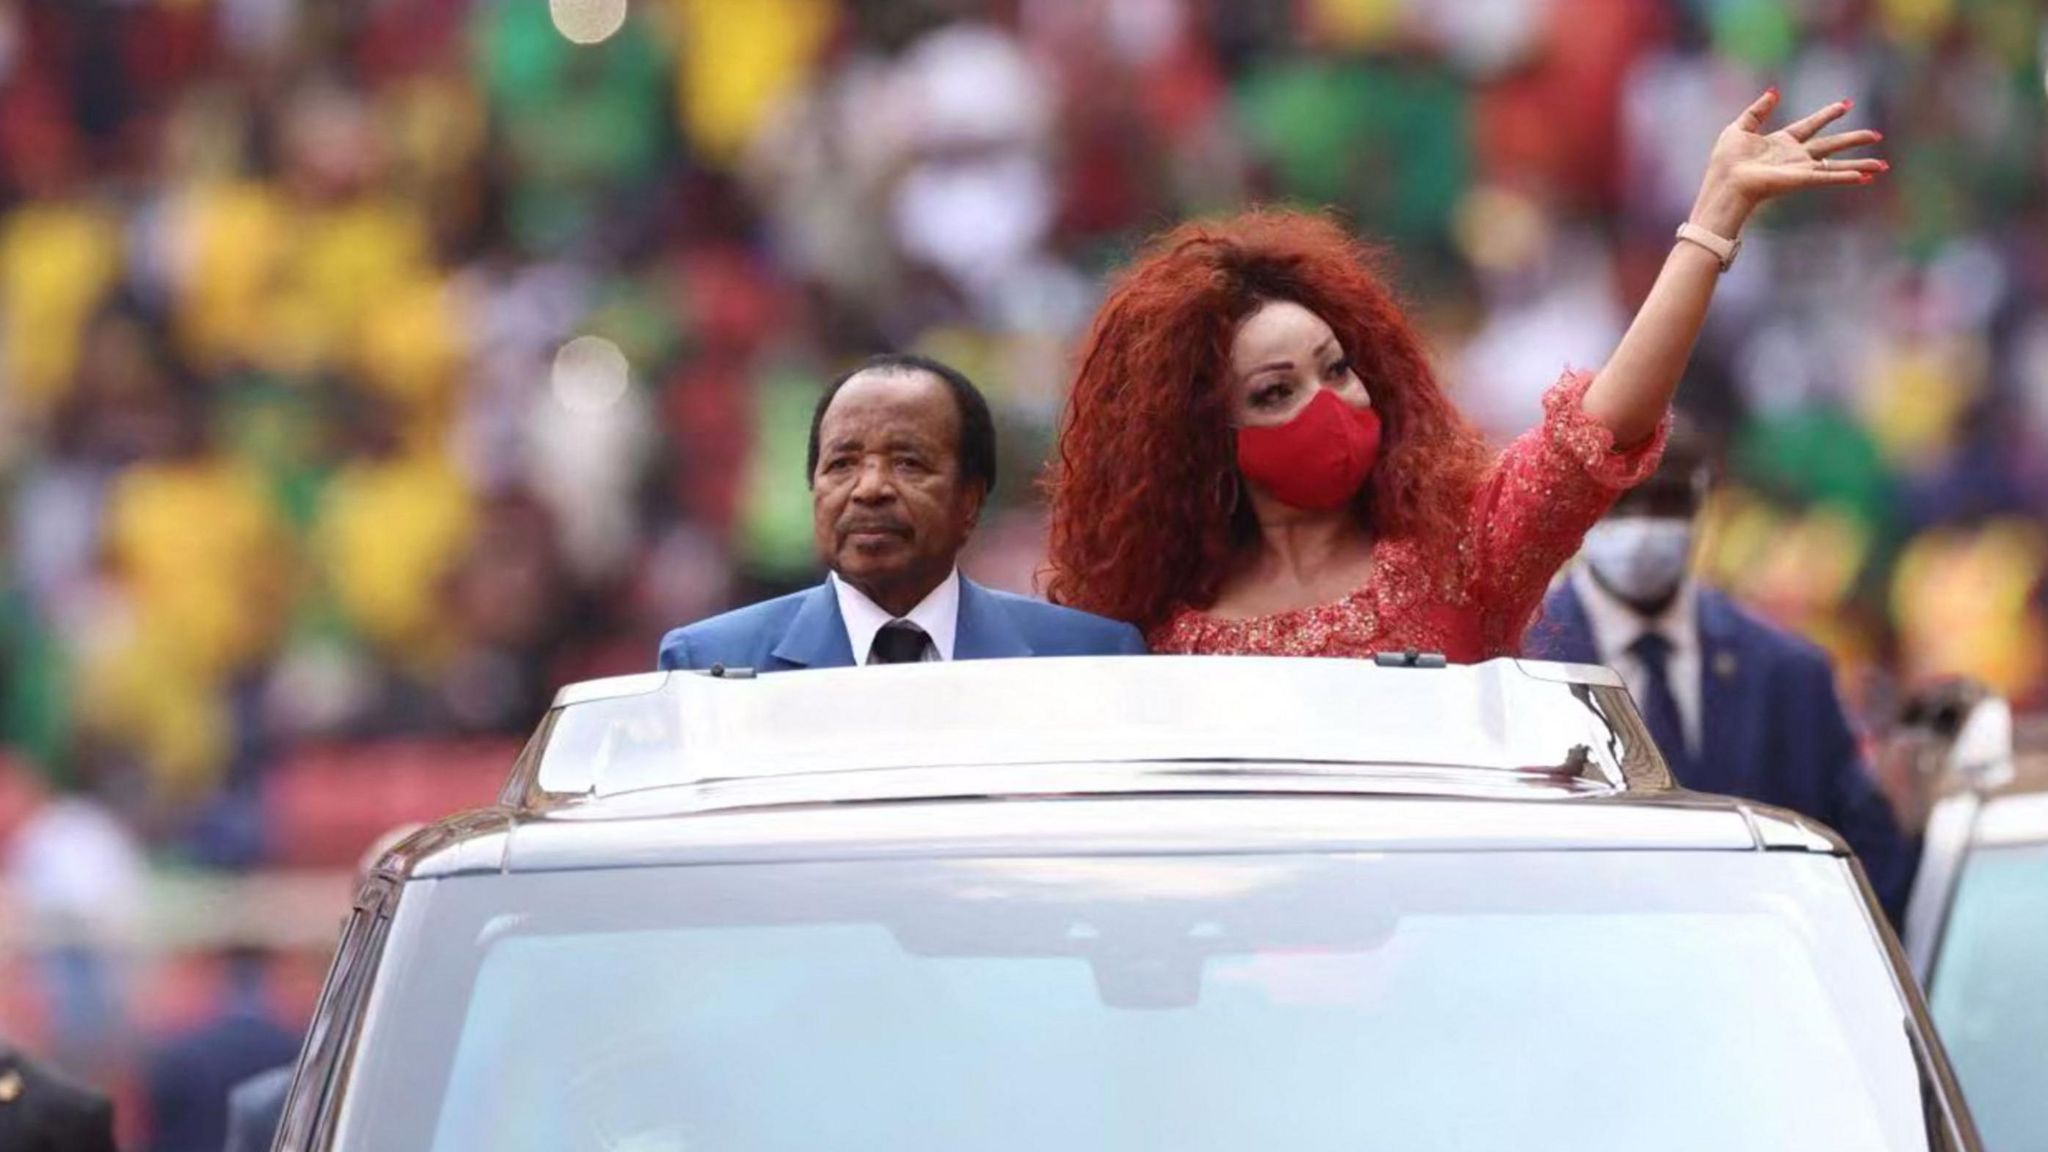 Cameroon's President Paul Biya and First Lady Chantal Biya wave at the crowd from a car during the opening ceremony of the 2021 Africa Cup of Nations 